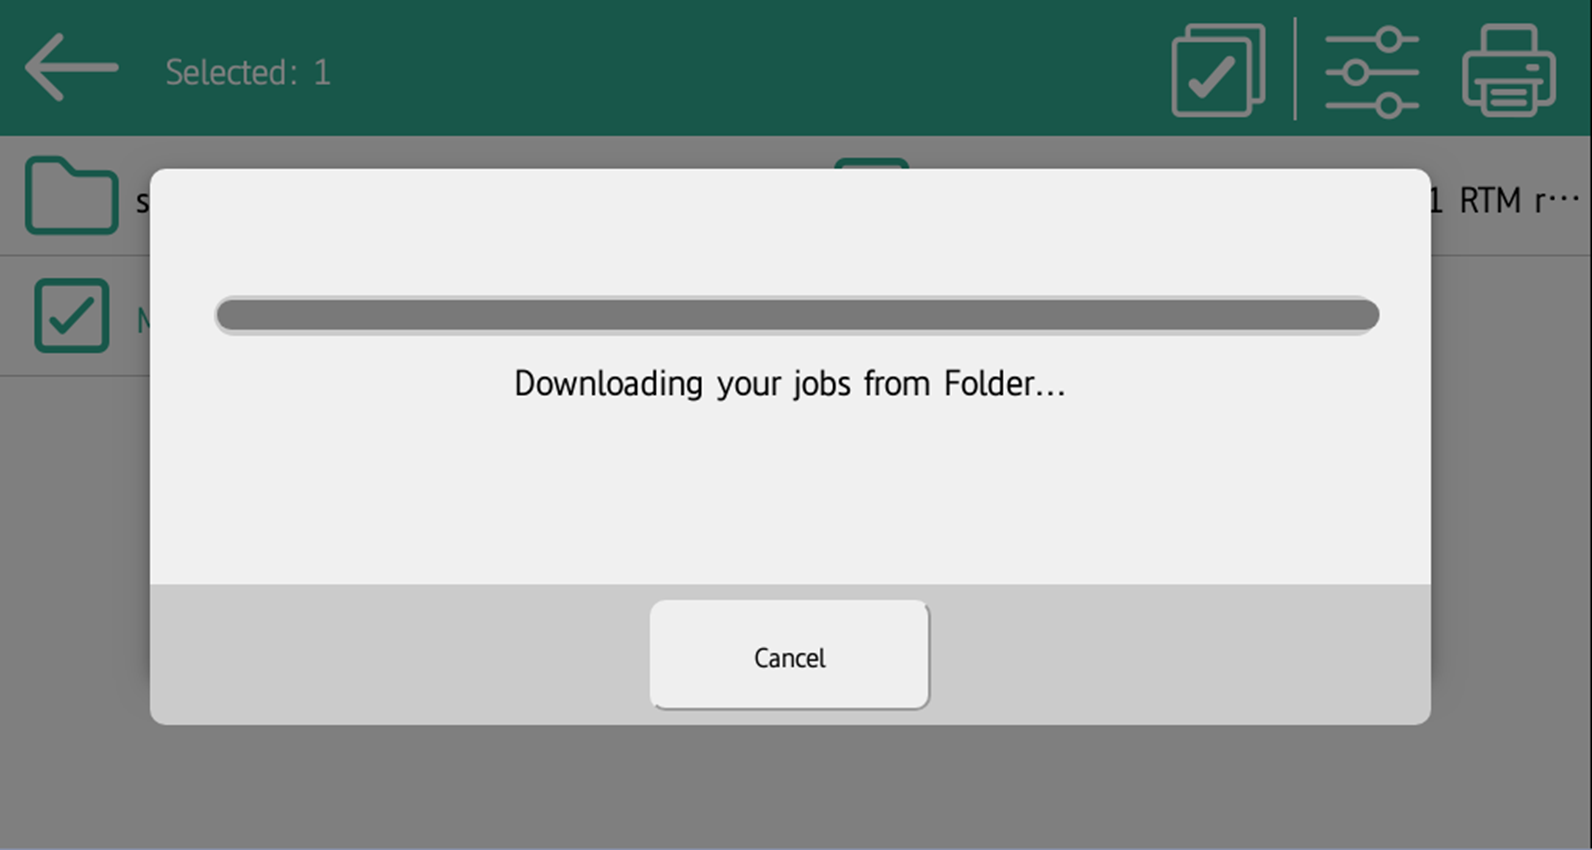 downloading jobs from folder screen on the terminal